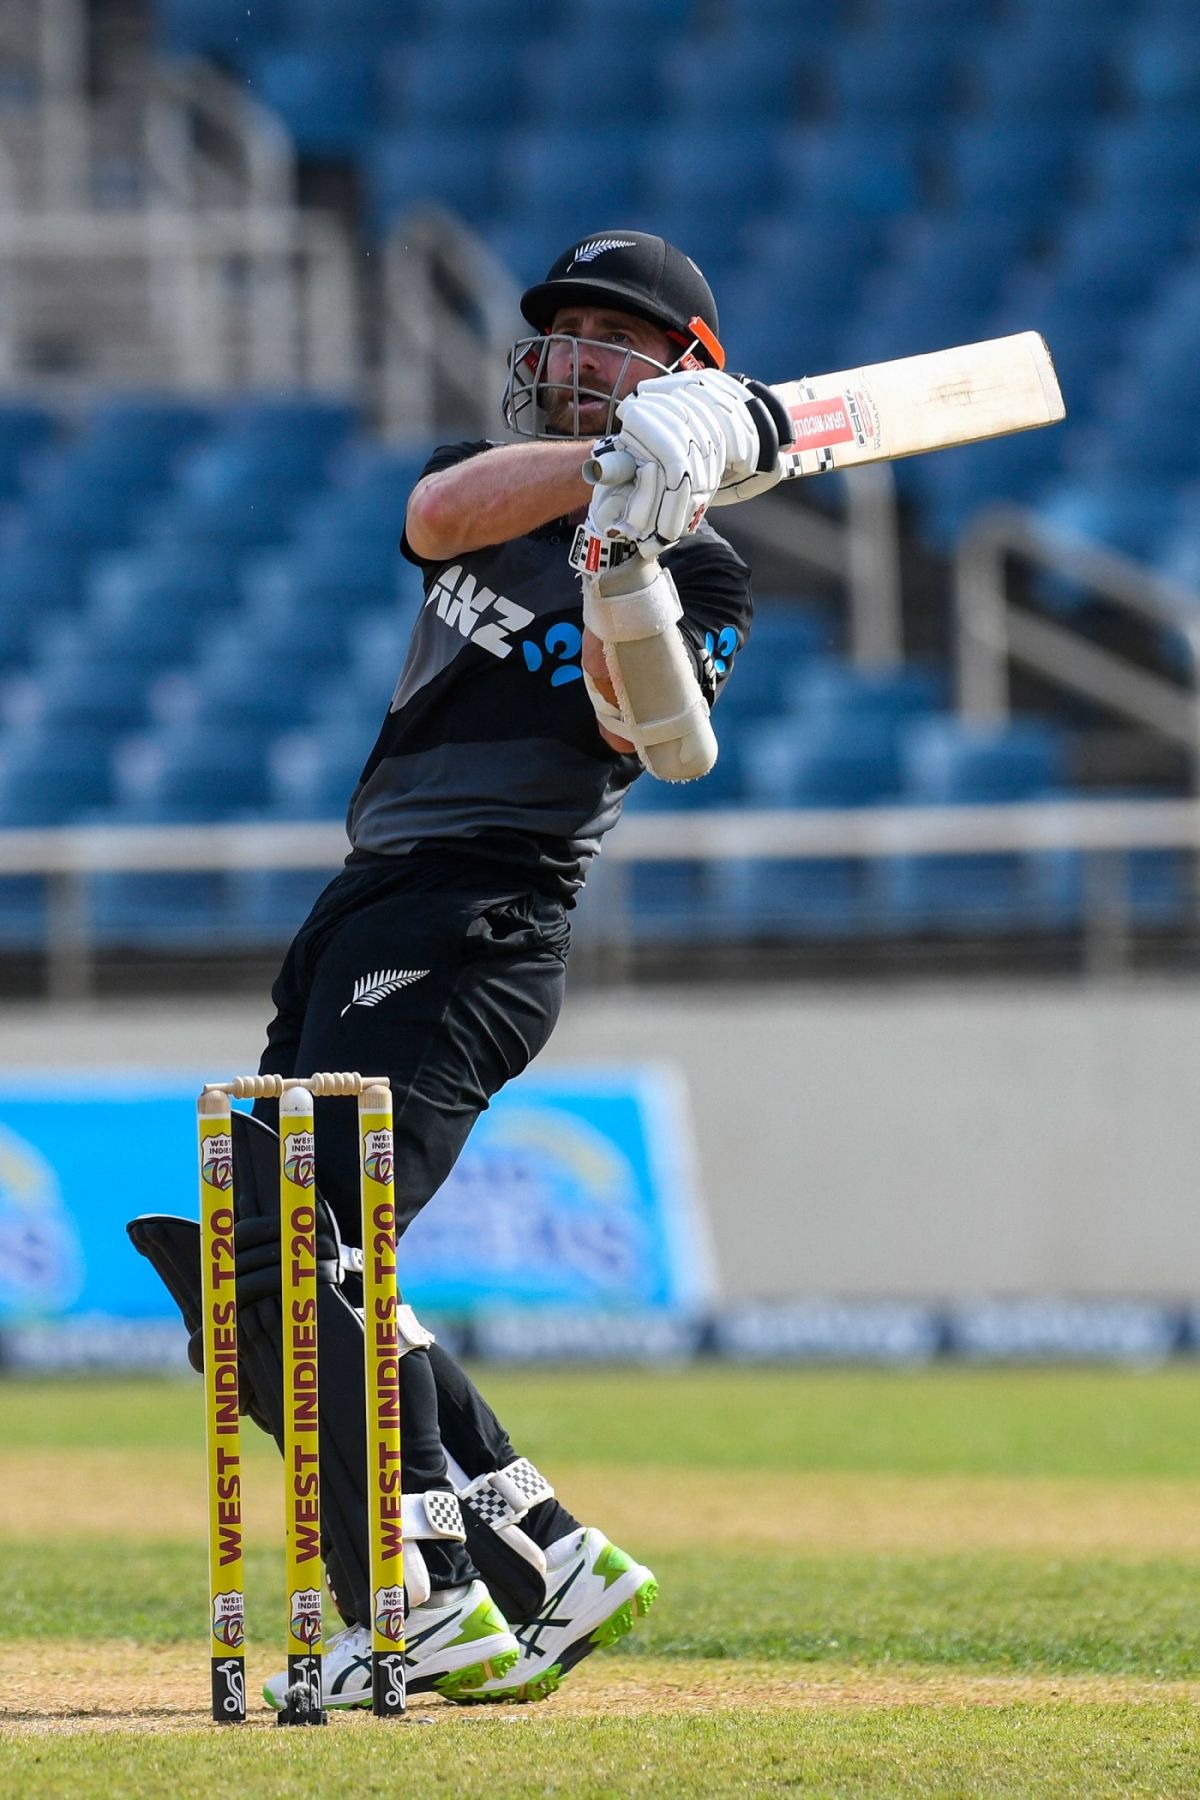 Kane Williamson scored a sprightly 47 off 33 balls to prop up New Zealand, West Indies v New Zealand, 1st T20I, Kingston, August 10, 2022